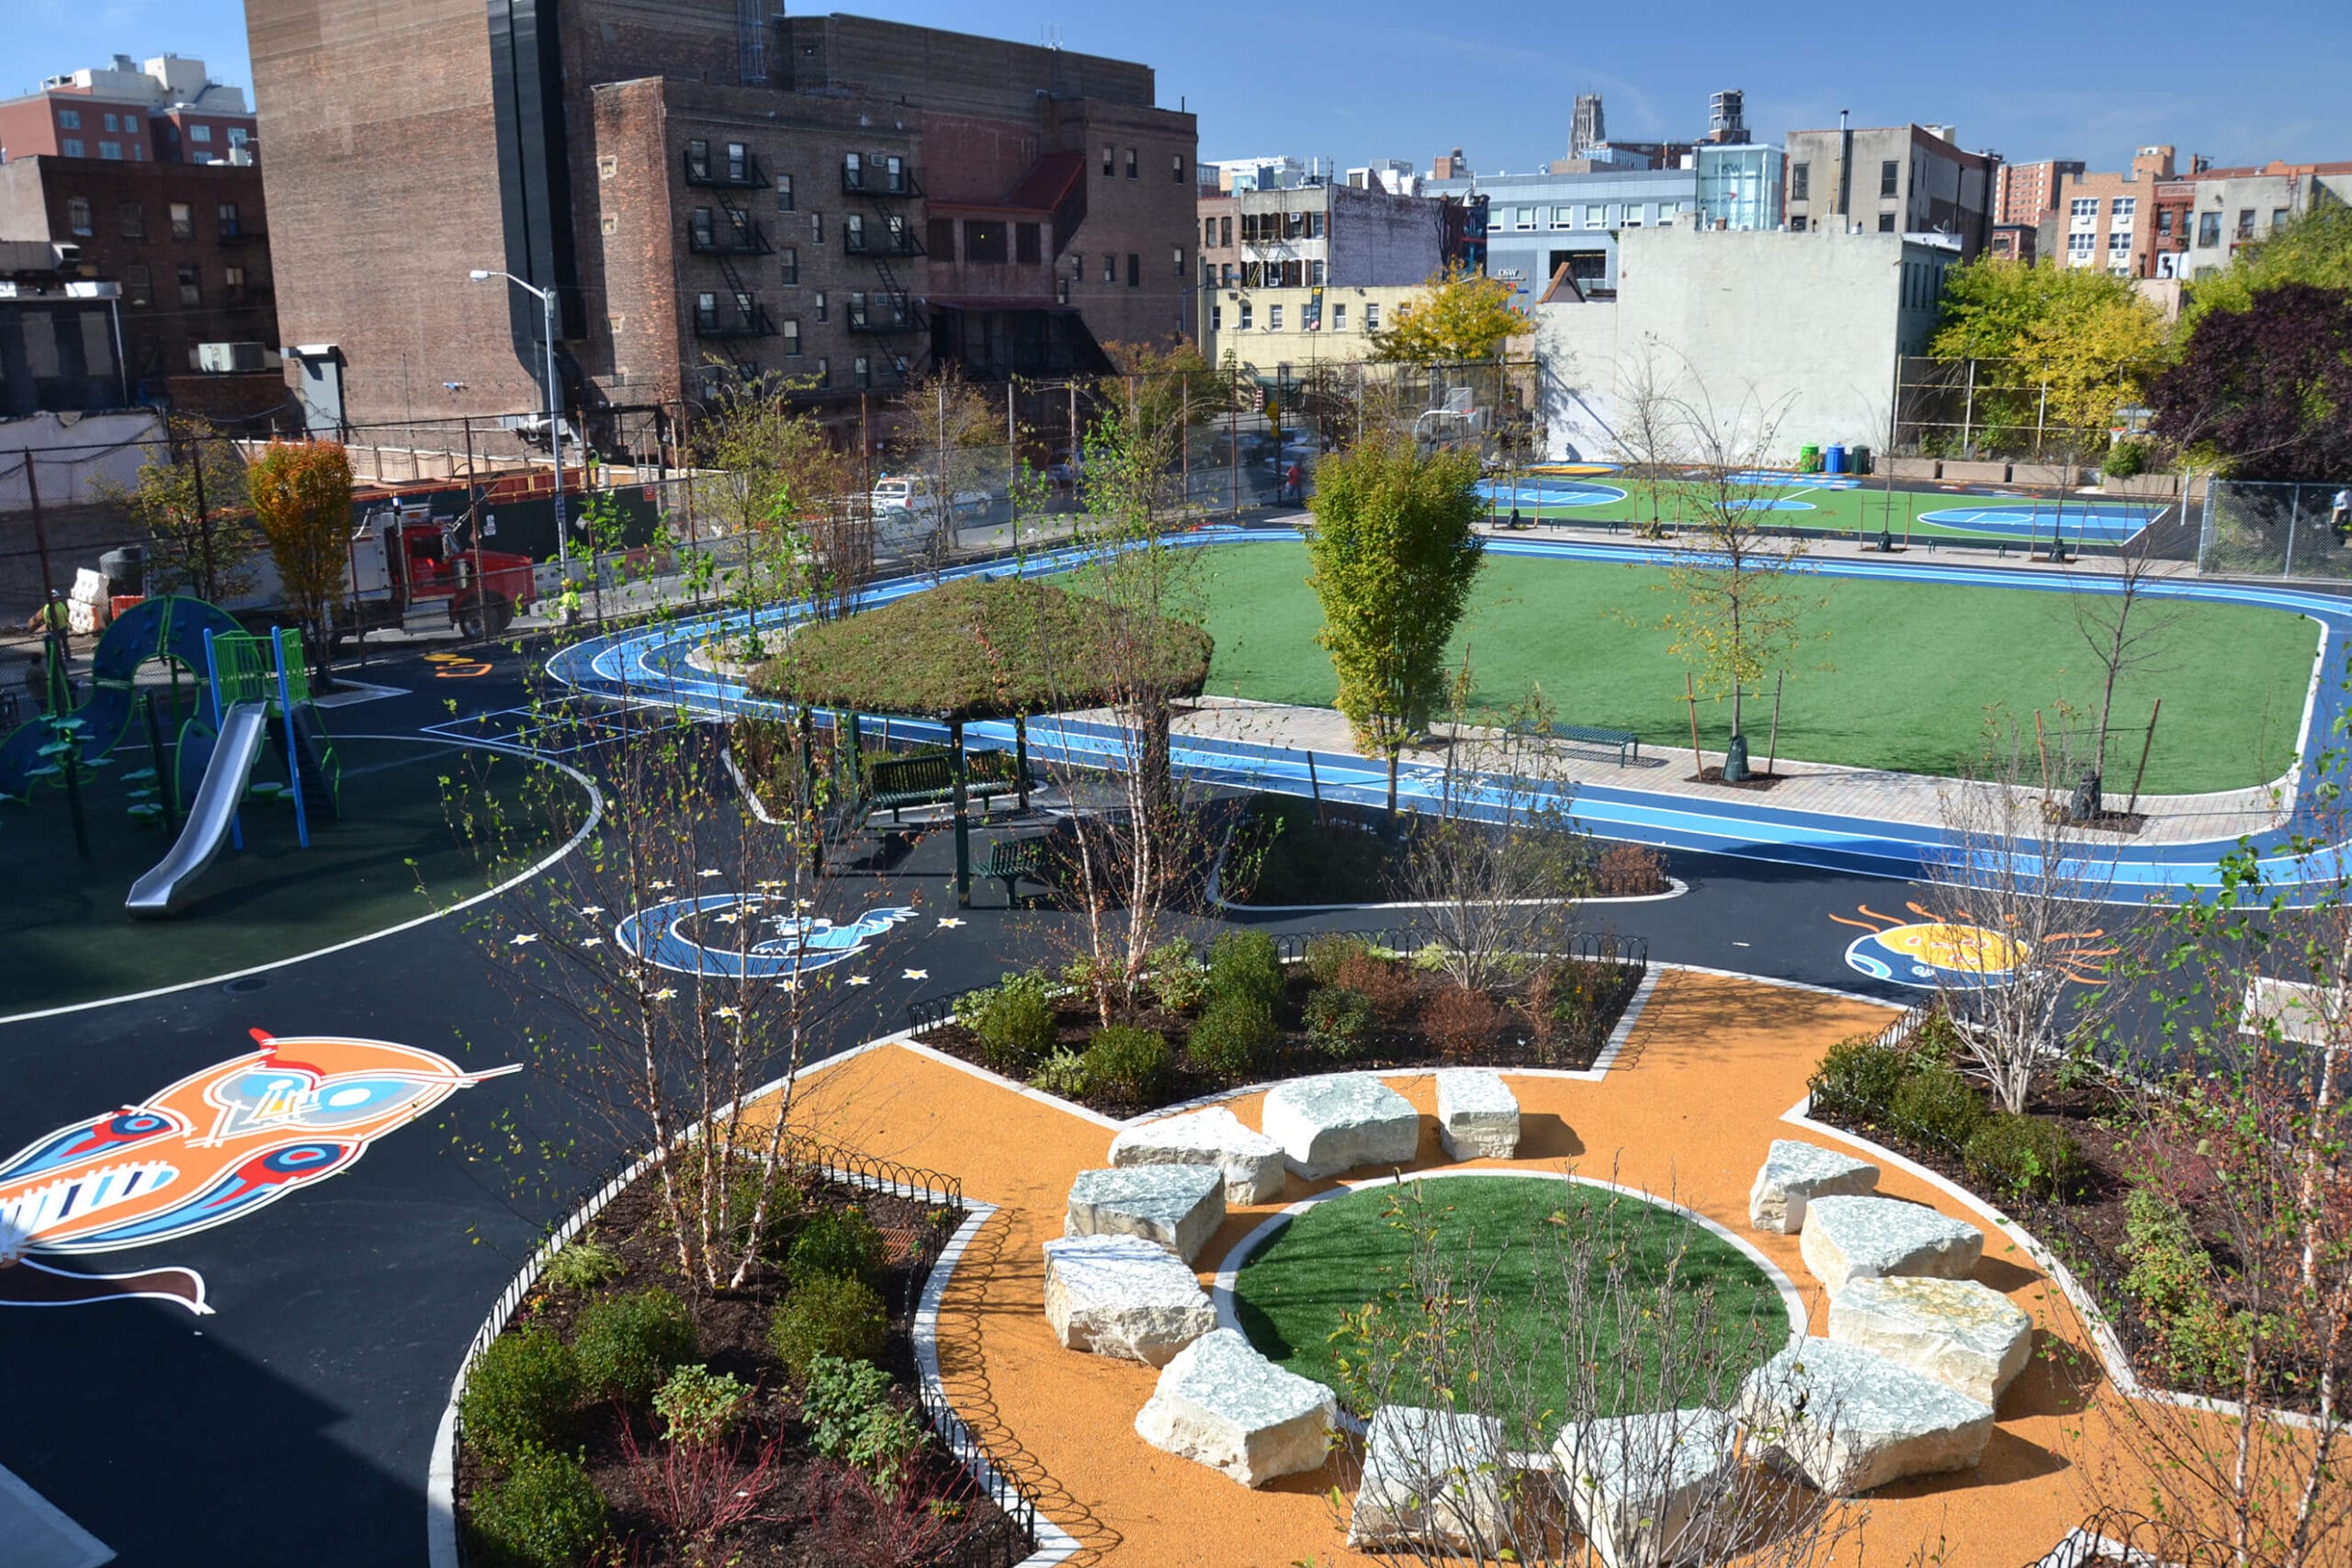 An aerial view of a playground in a city park.